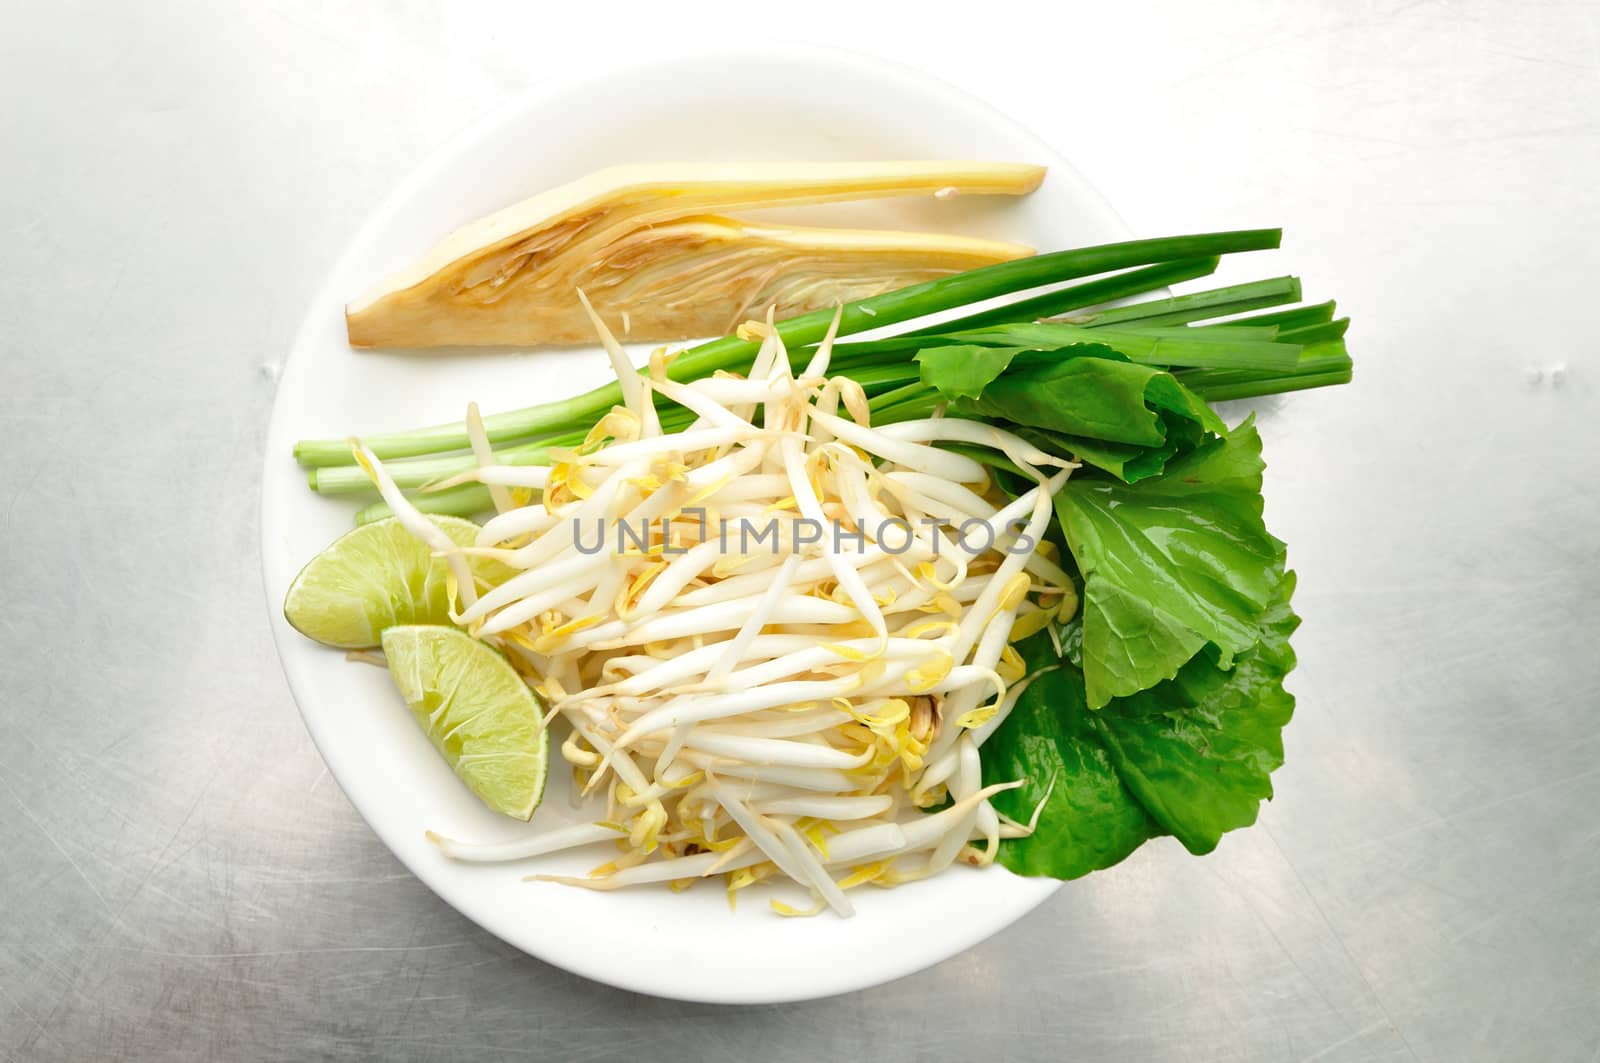 Mix of Thai Vegetable, Bean sprout, lime, banana blossom and Garlic chives on white plate.